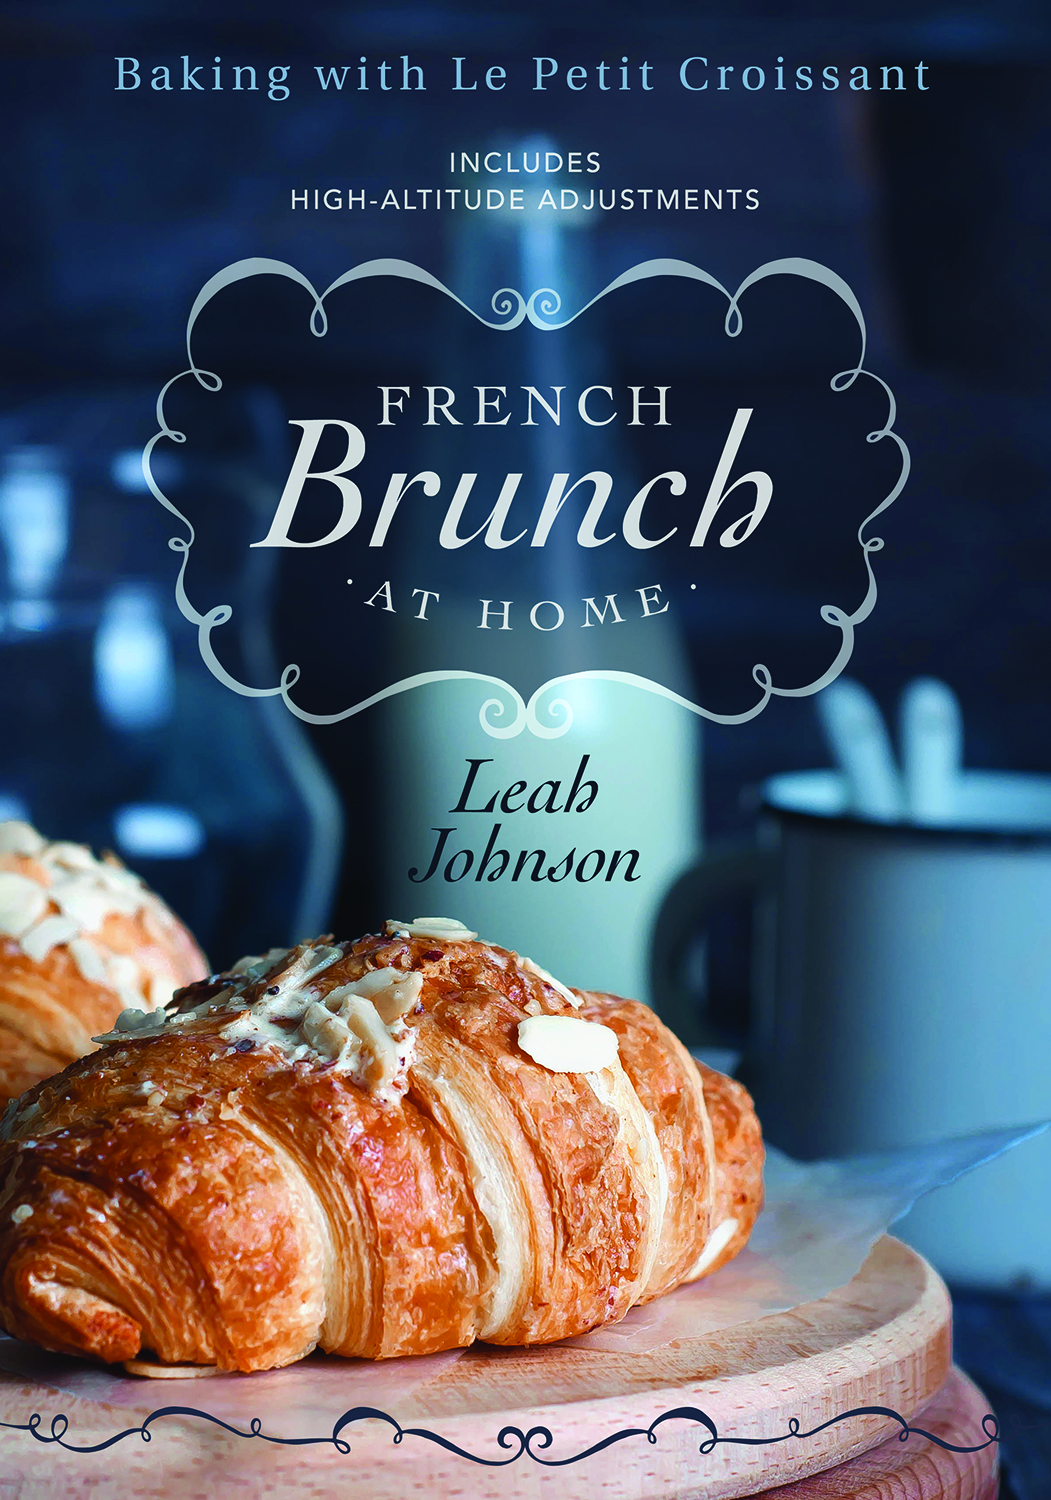 “French Brunch at Home” is an exquisite full-color cookbook, off-set printed on matte coated paper.